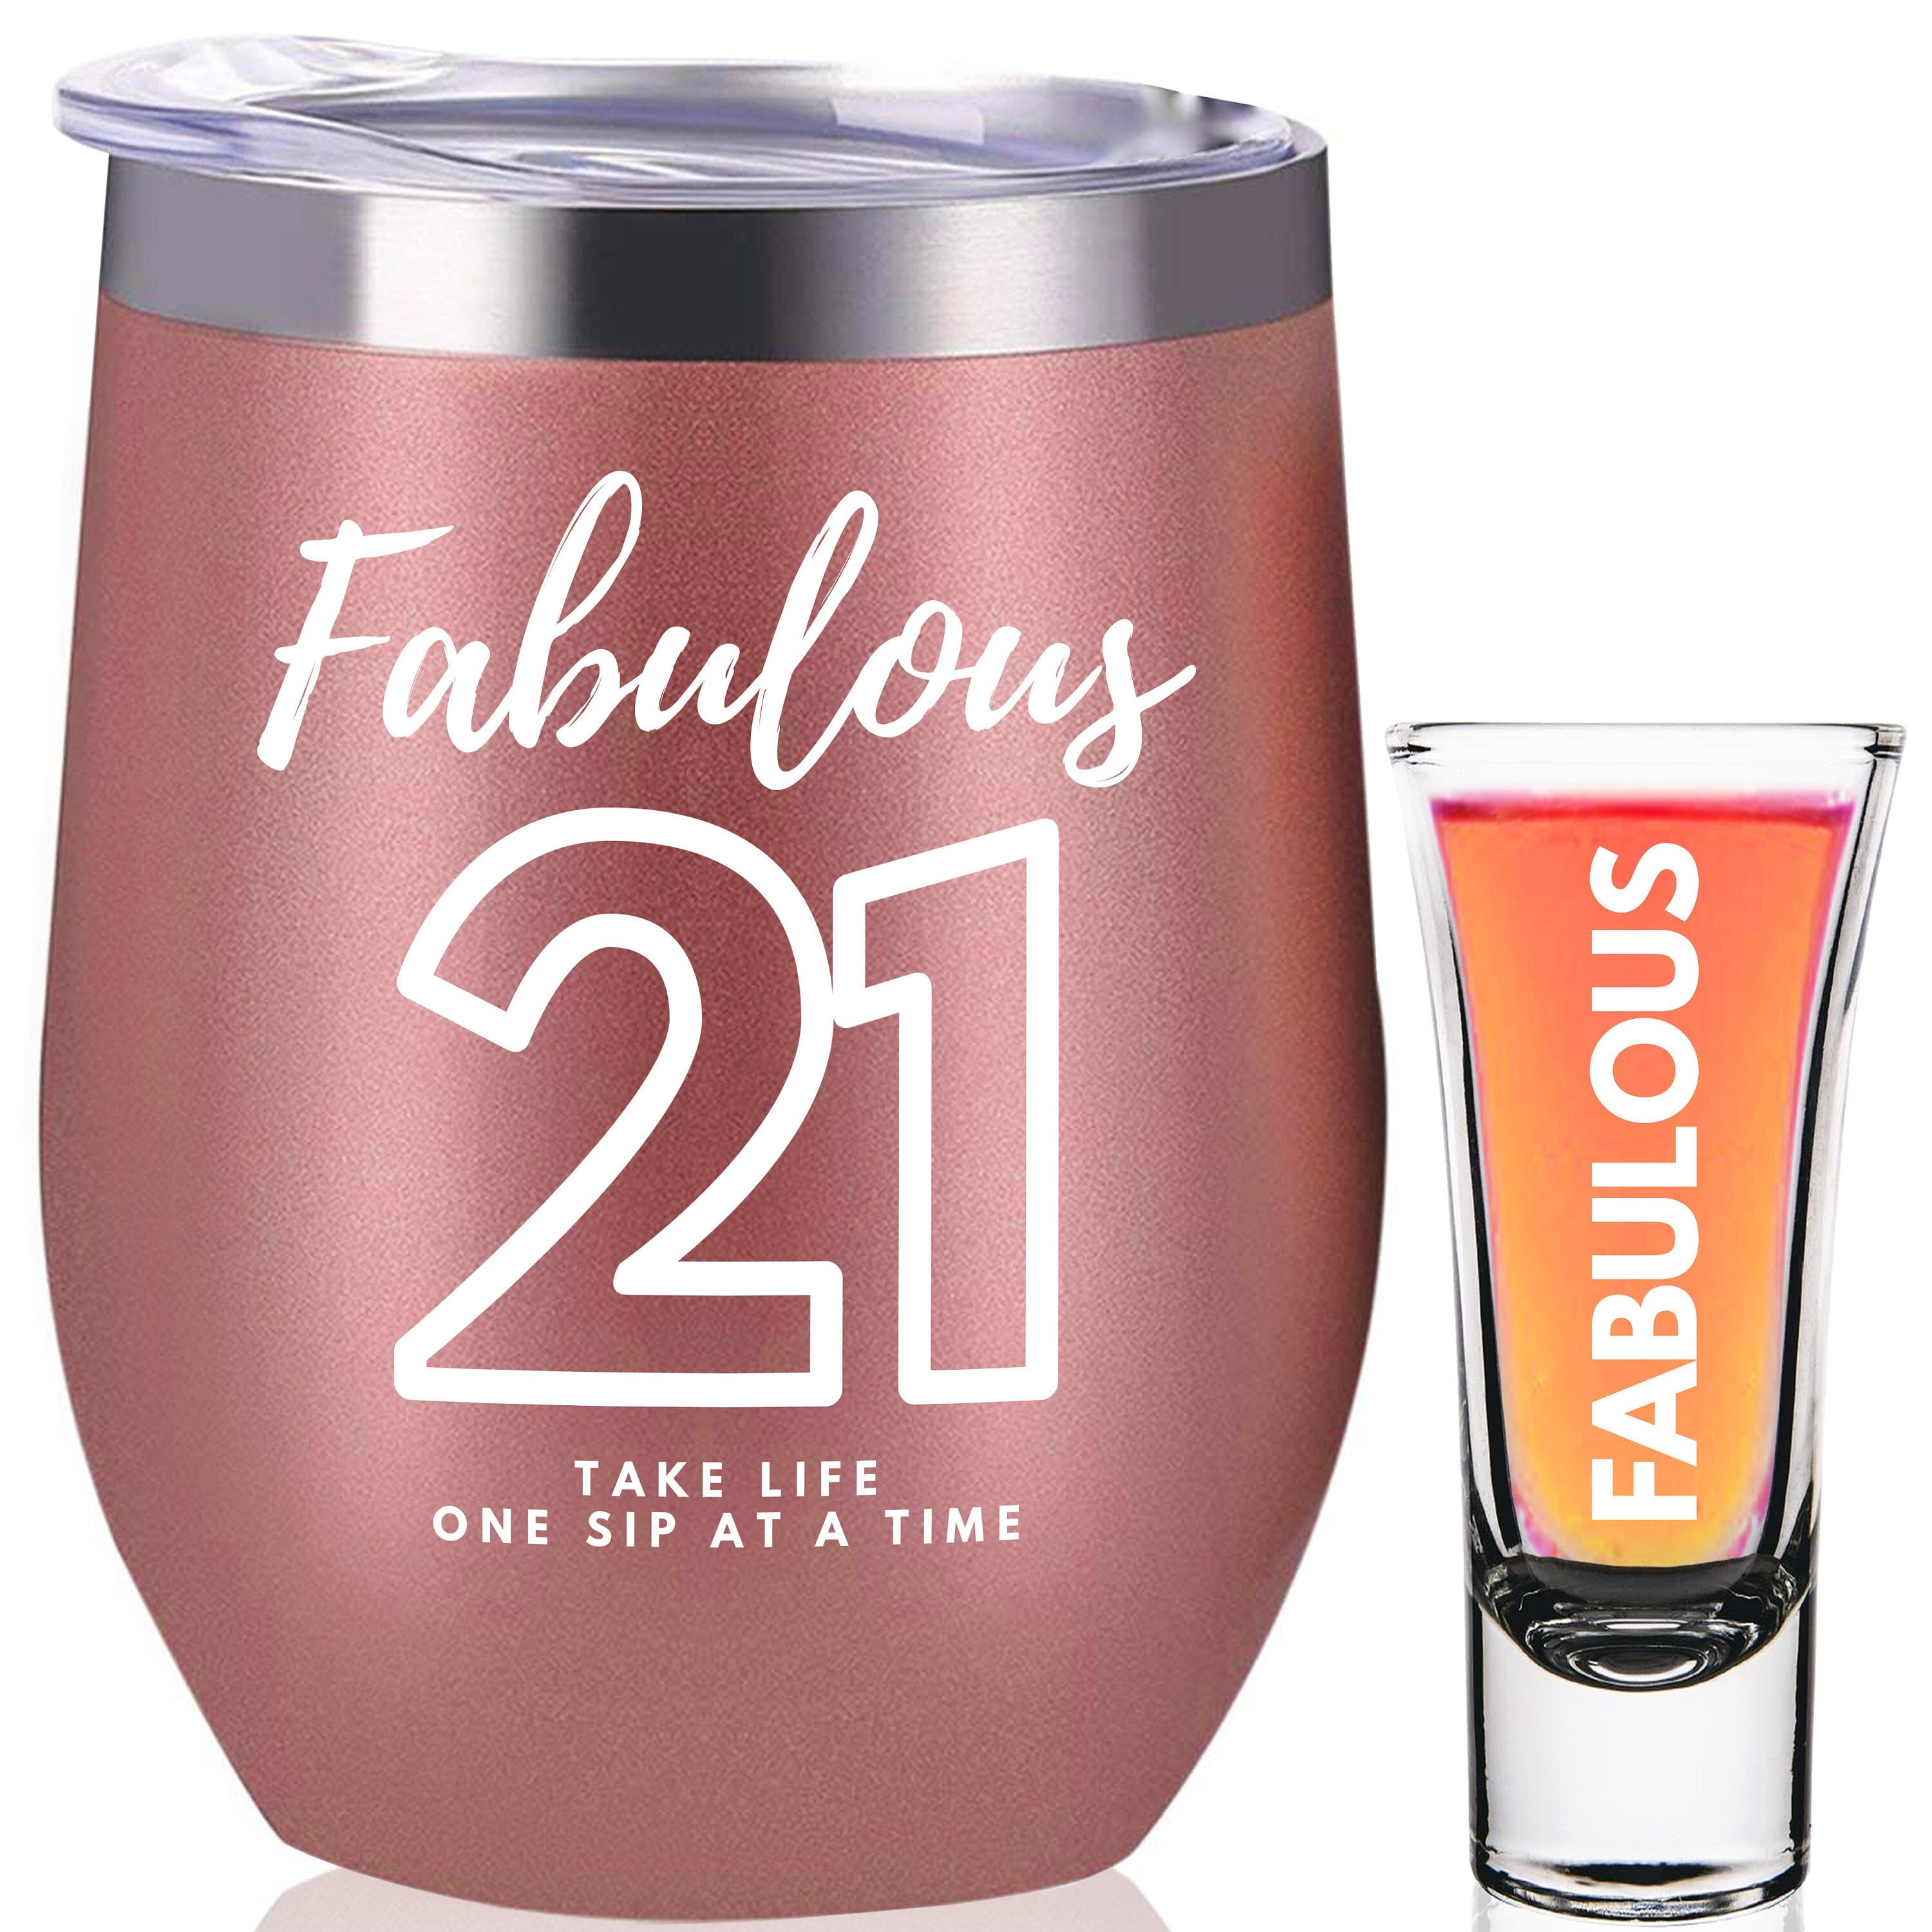 1st Legal Shot 2000 21st Birthday Shot Glass Funny Birthday Gifts for Him or Her Turning 21 2 oz Shot Glass for a Happy Birthday Present or 21st Birthday Party Decorations or Party Favors 